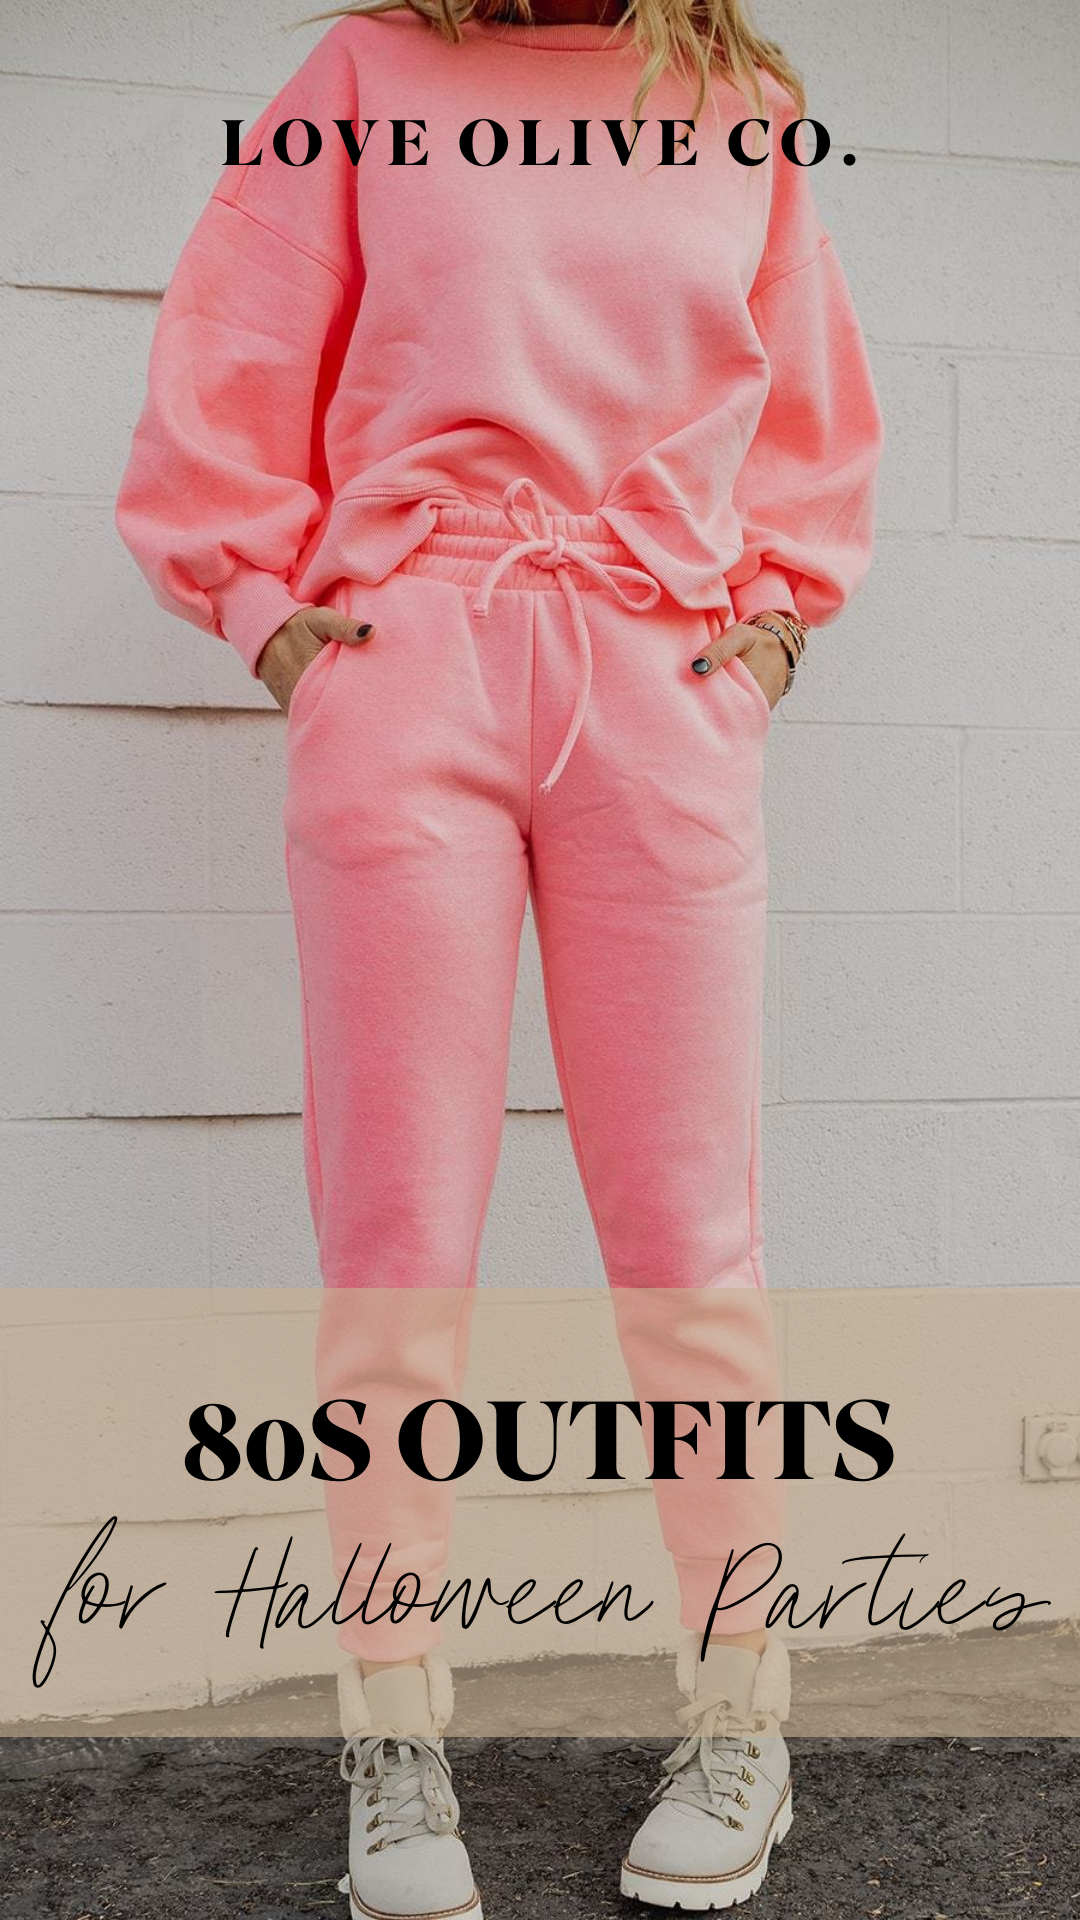 80s outfits for Halloween parties. www.loveoliveco.com